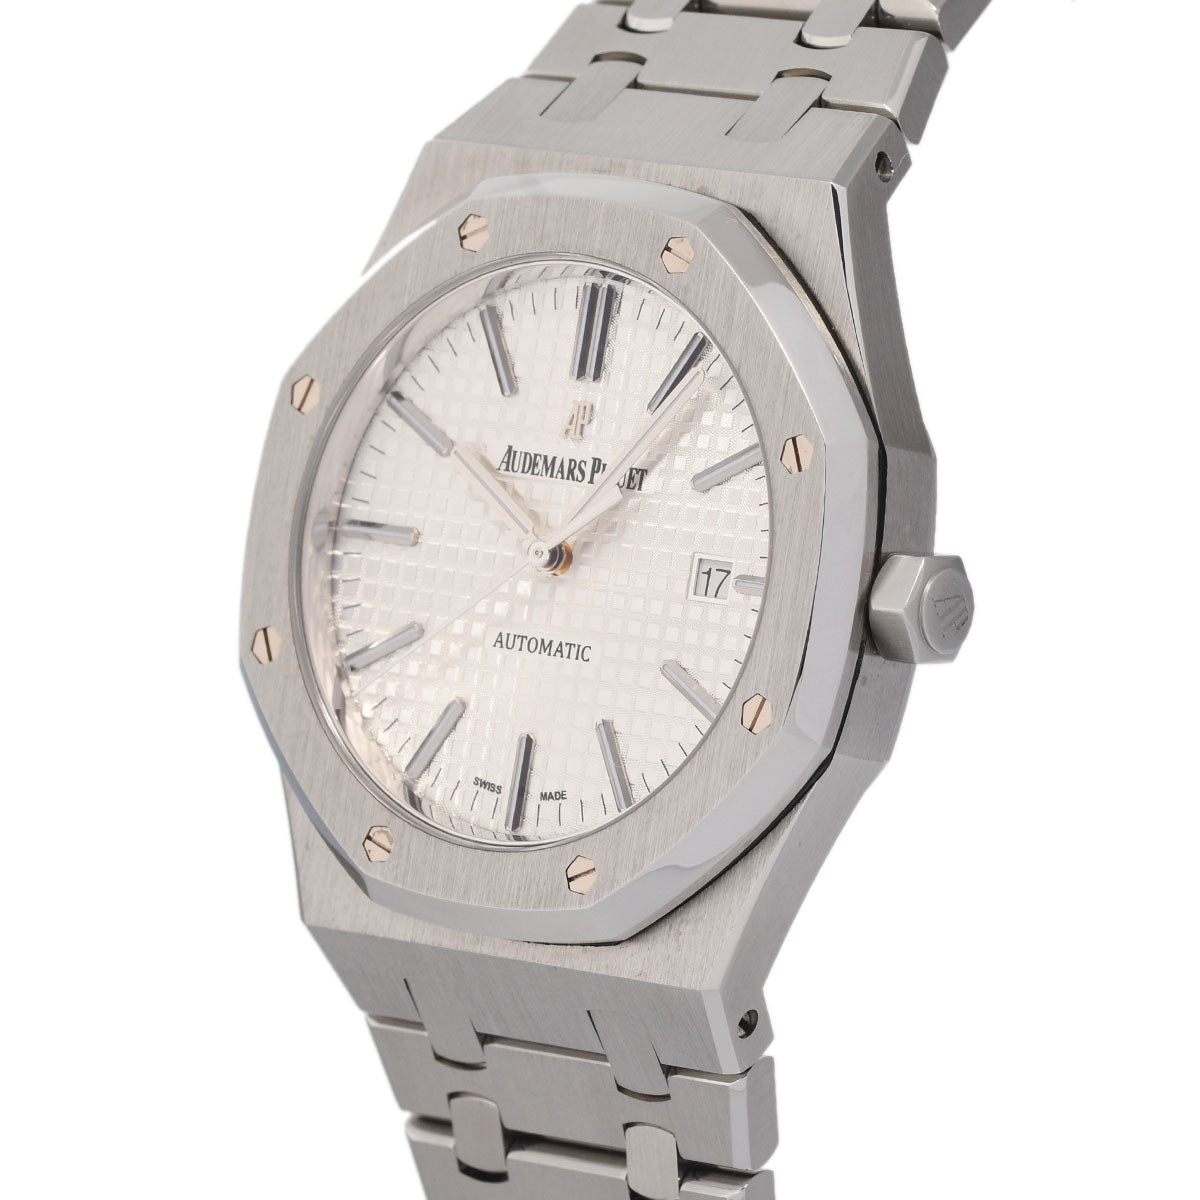 AUDEMARS PIGUET OEDEMAPIGE ROYAL ORK 15400ST.OO.1220ST.02  SS Watch Automatic Rolling Silver Disc A Rank Middle-Range